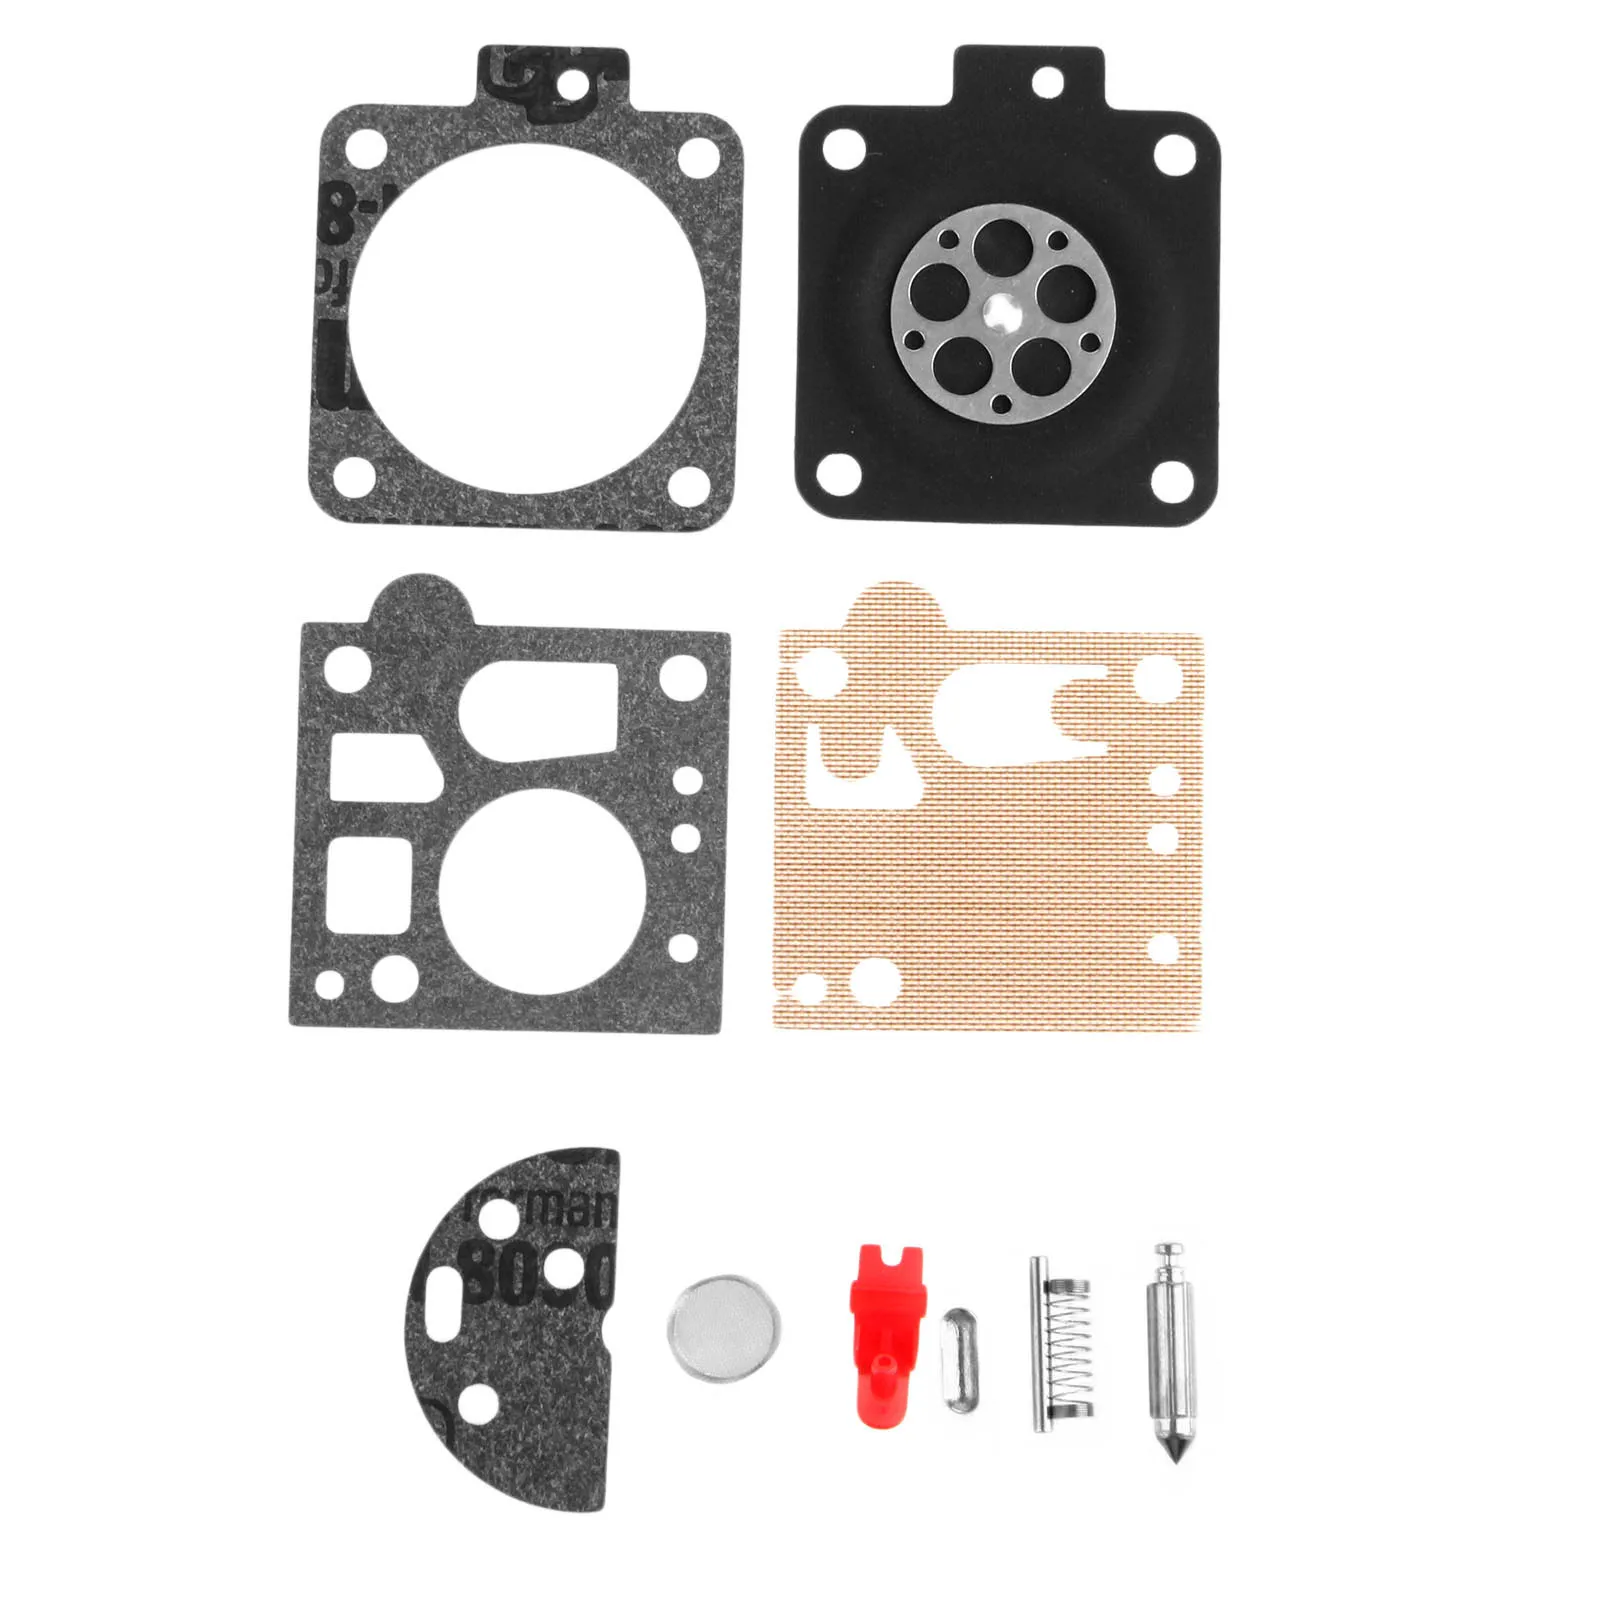 

MS380 Chainsaw Carburetor Carb Repair Gasket Kit fit For STIHL MS380 MS381 038 AND SOME 066 06 Chainsaw Spare Parts